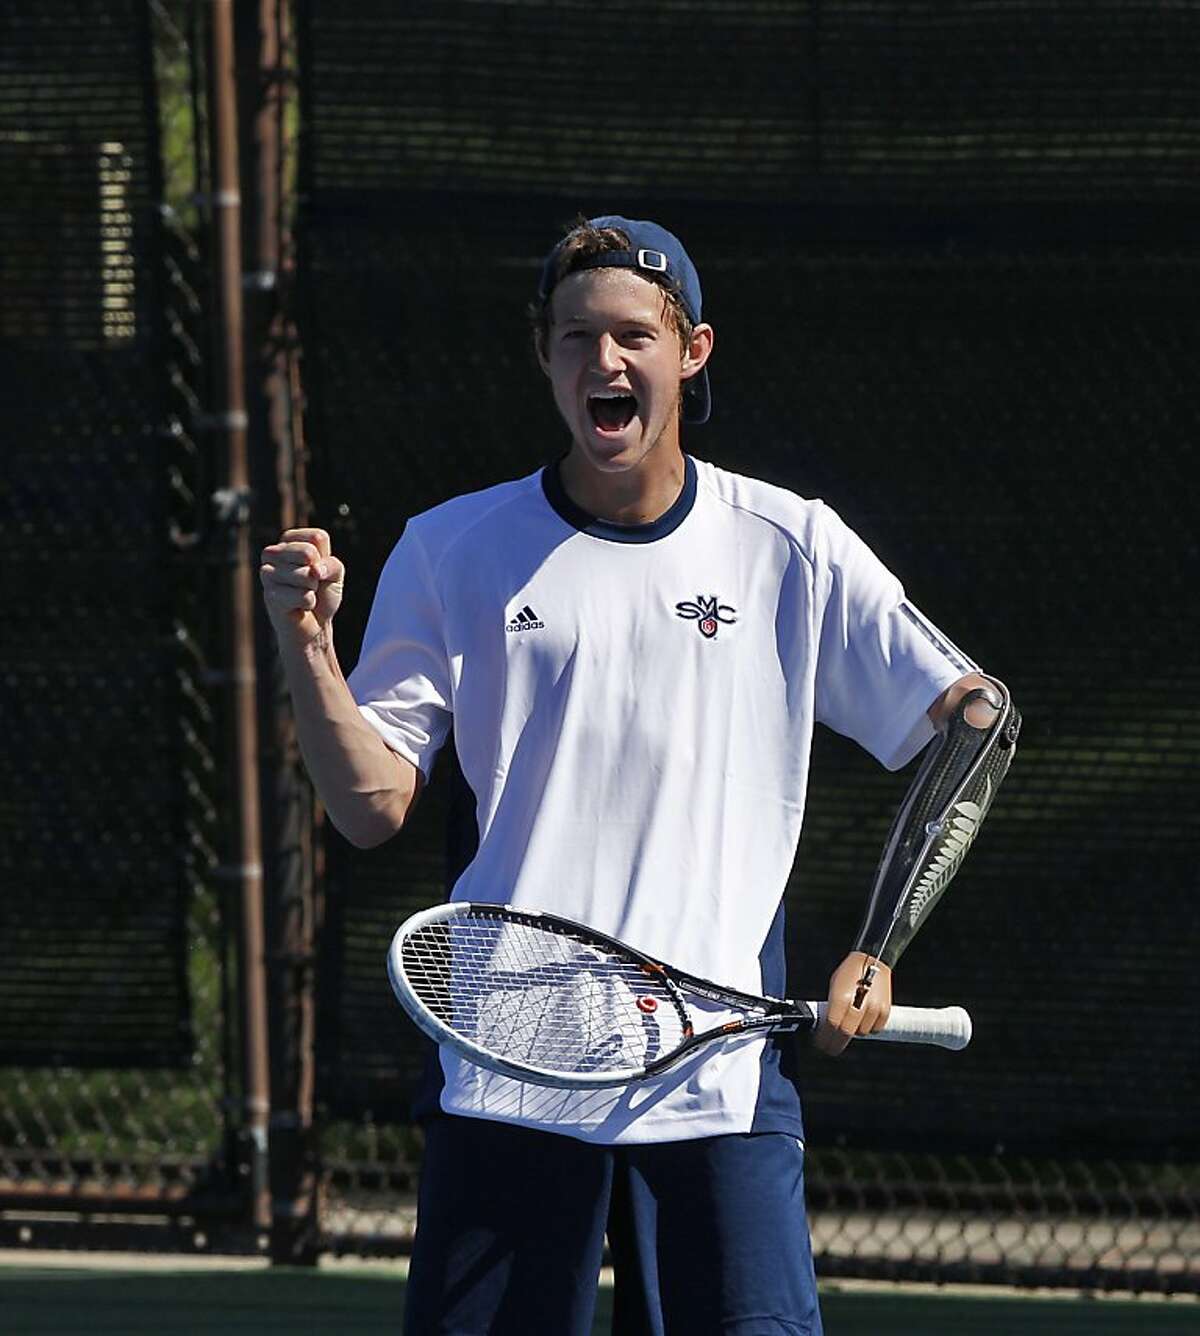 Alex Hunt celebrates a point against his doubles opponent on Wednesday, April 10, 2013. Hunt is a freshman tennis player from New Zealand at St. Mary's College in Moraga, Calif. But that's not what makes him standout, he's playing Div. I tennis with a prosthetic left arm.